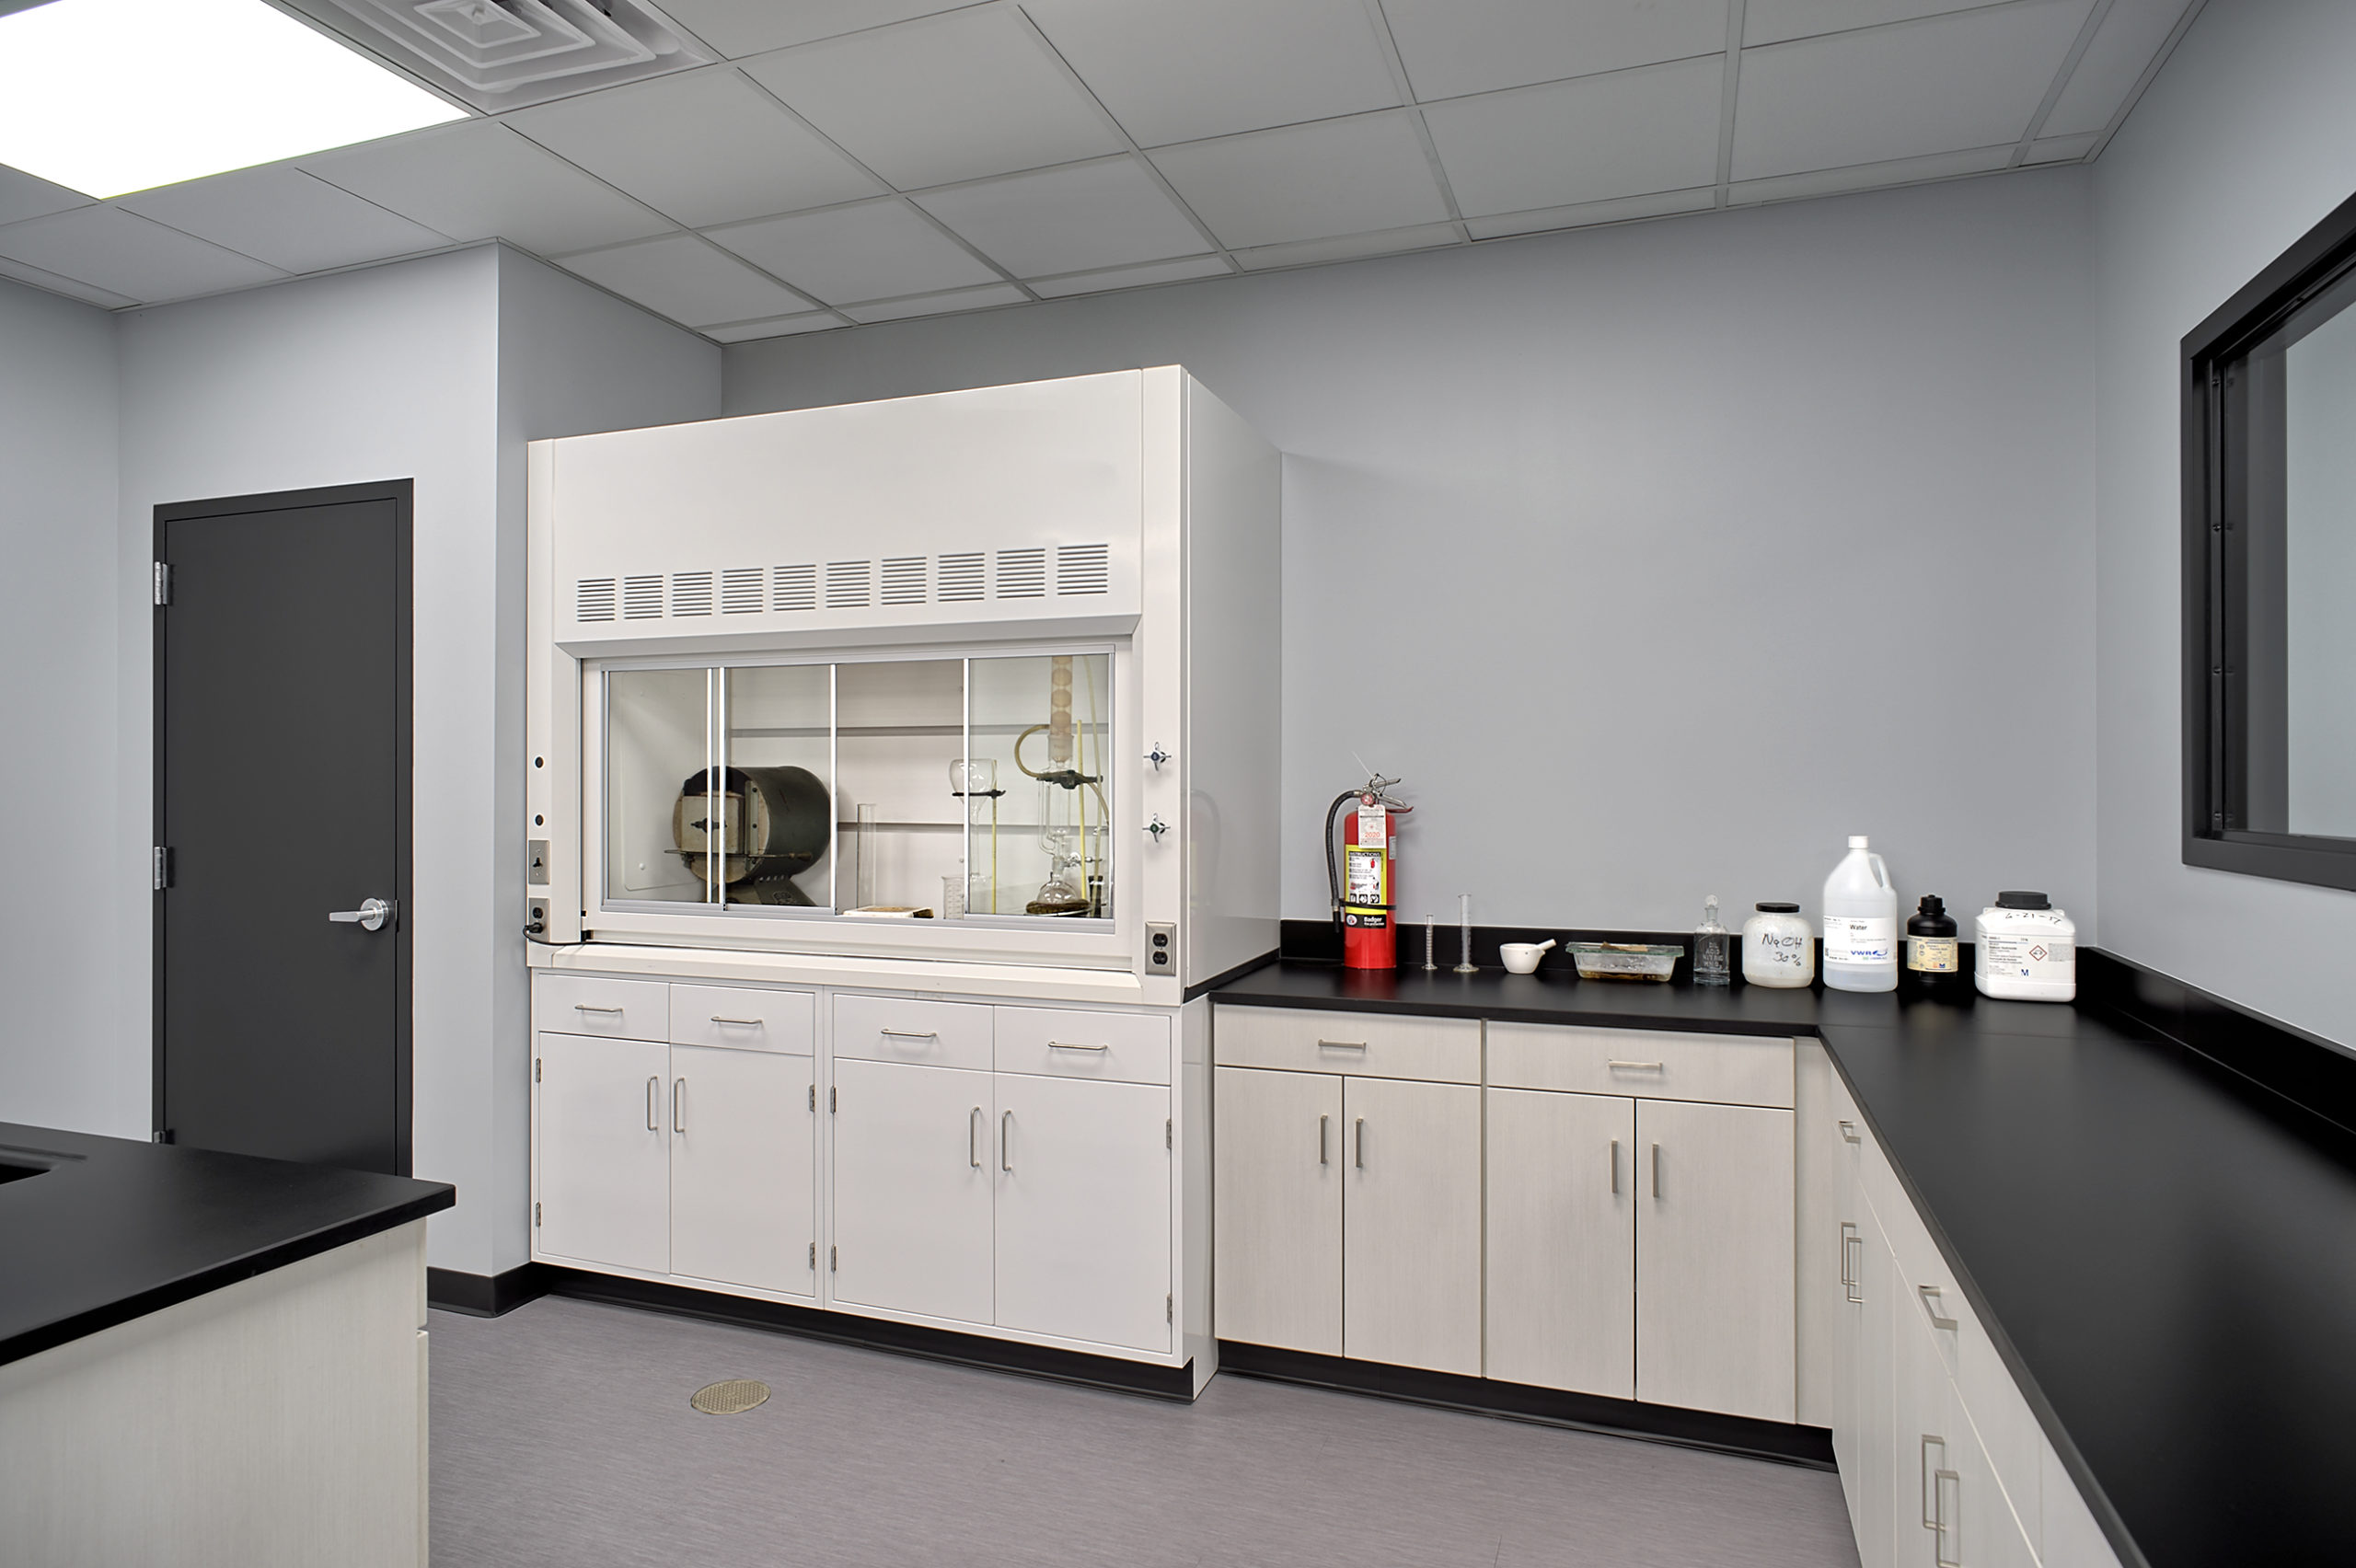 3 Tips for Designing a Laboratory